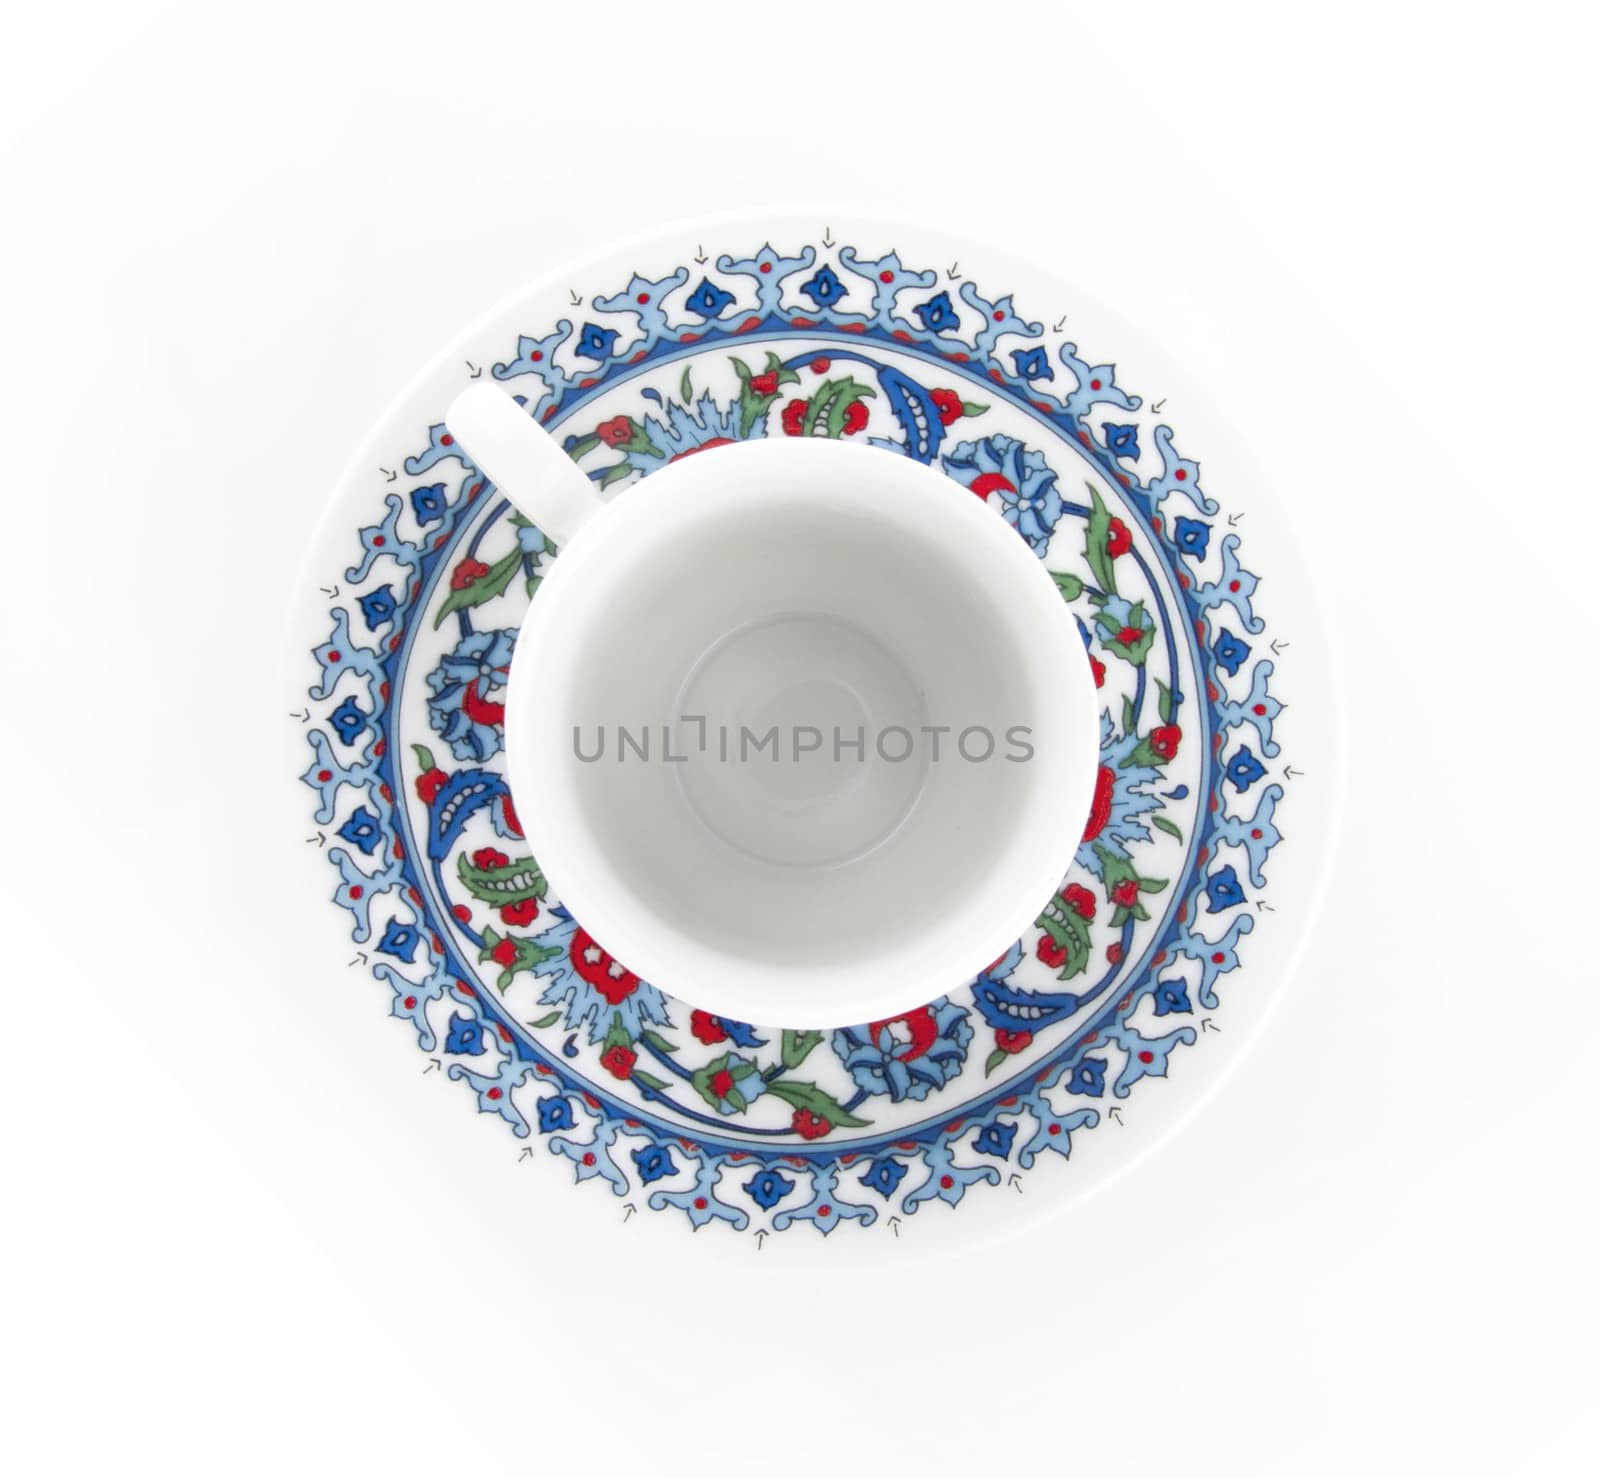 Ornamented teacup top view by shutswis